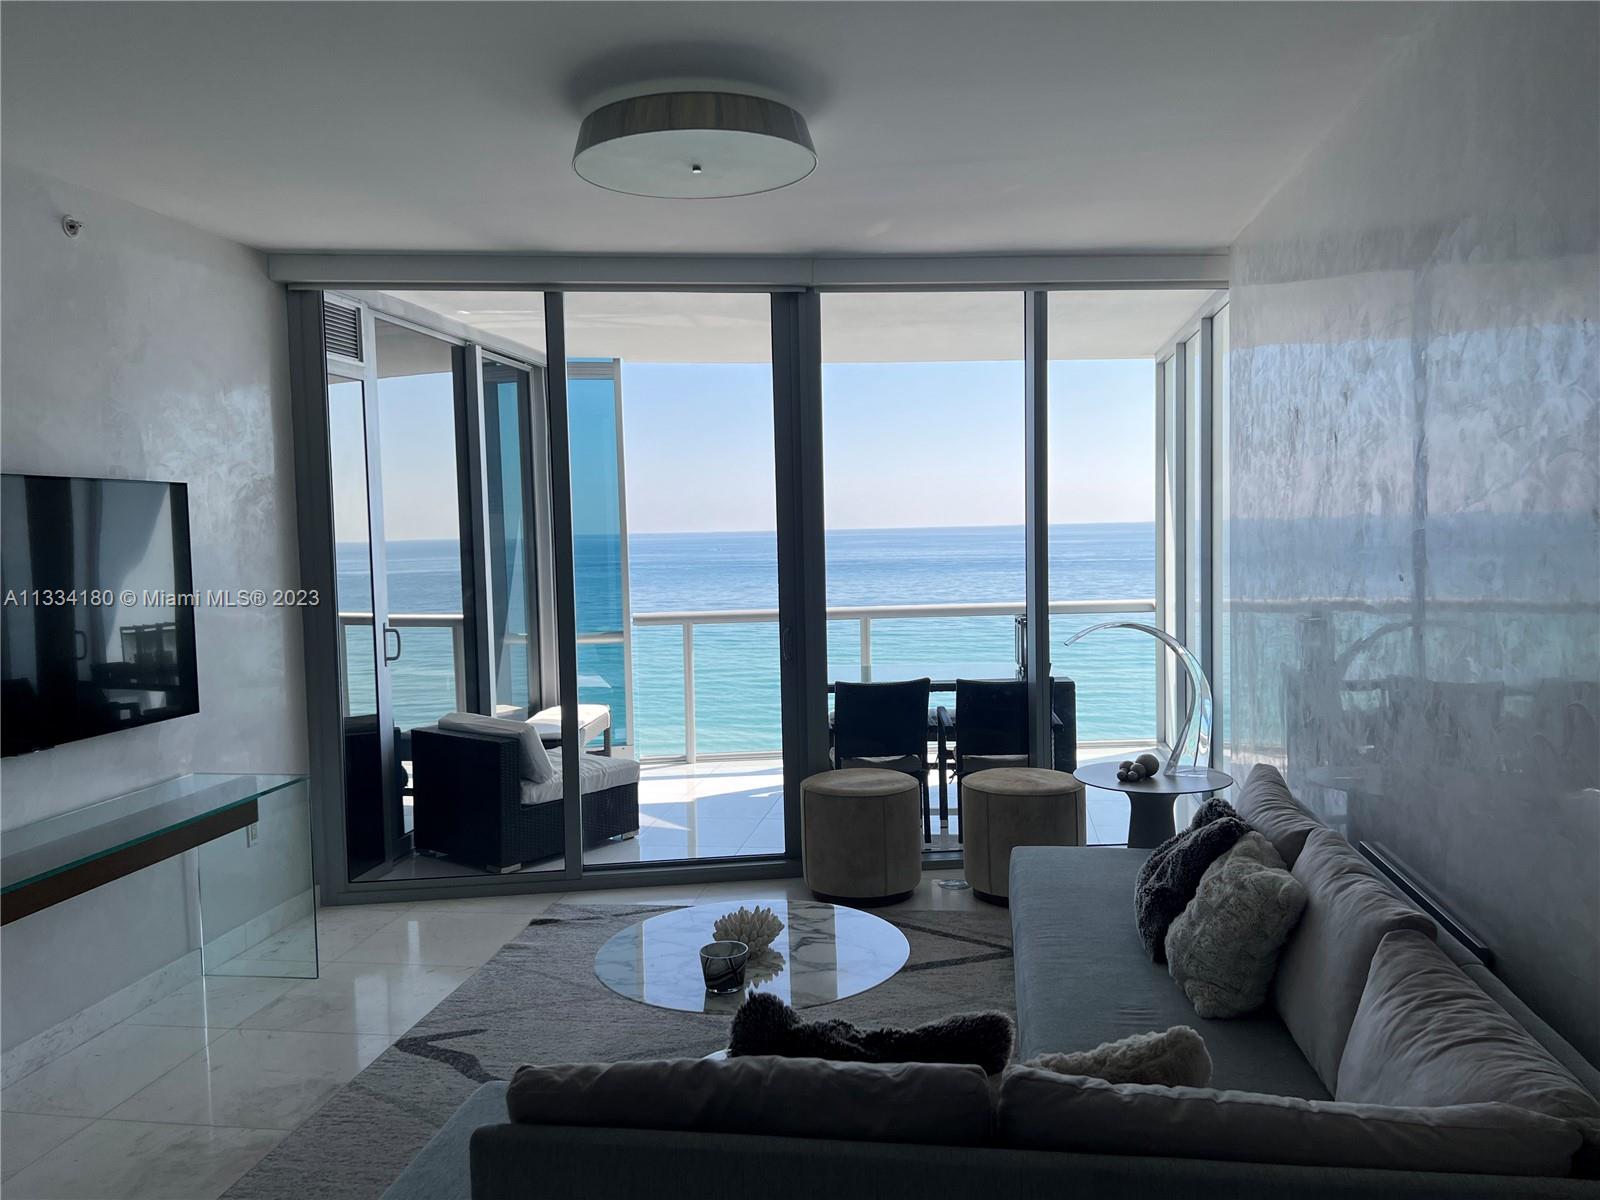 Superb 1 bed 1.5 baths condo for rent in one of the most spectacular oceanfront buildings in Sunny Isles Beach.Enjoy direct ocean views from this modern unit with high end finishes such as Calacata marble throughout,Venetian plaster wall painting, top of the line Miele appliances and SubZero refrigerator, and custom made closets.Enjoy luxury resort living in 5 star amenities featuring 2 swimming pools (sunrise and sunset pools), spa, beach service, most updated and challenging exercise room , movie theater, business center, kids room and 24/7 security